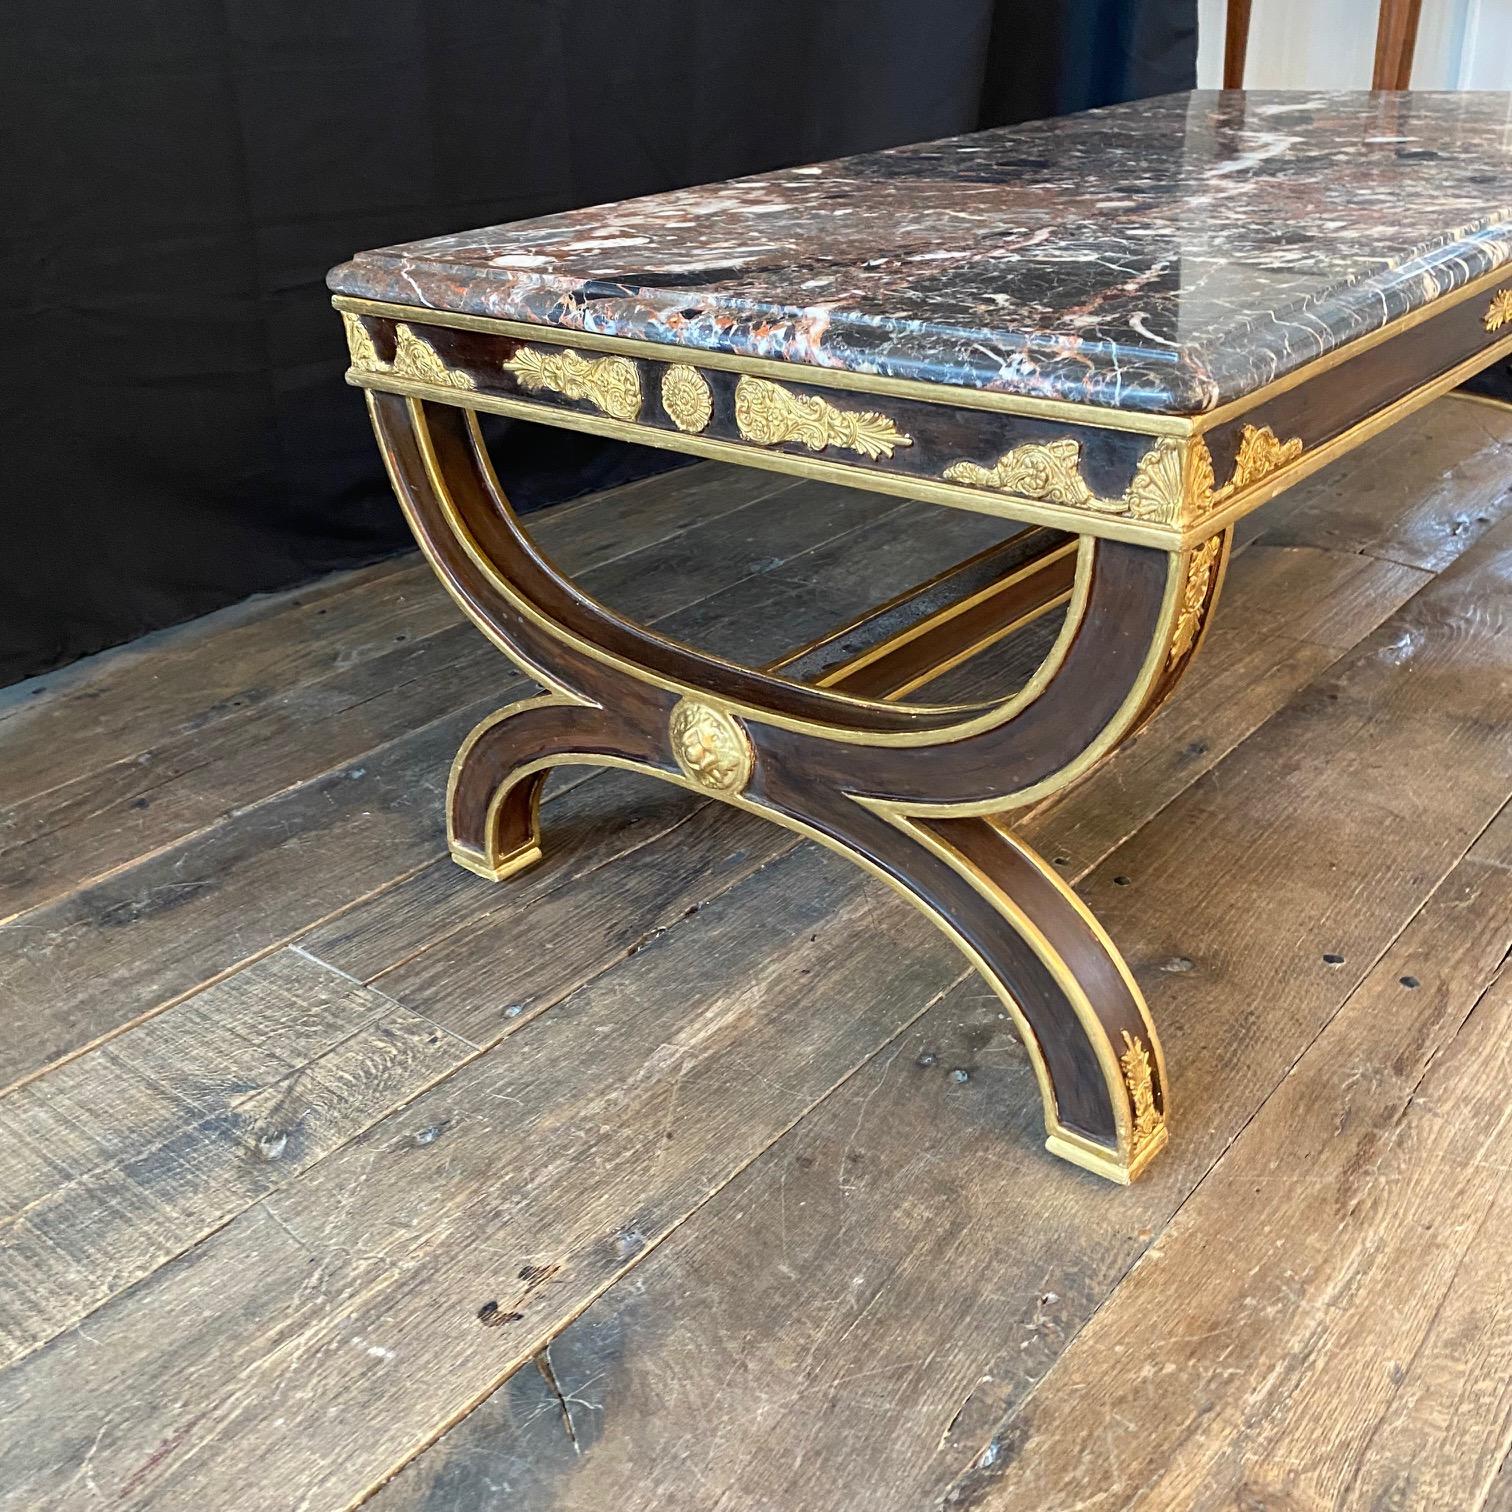 Ebonized Elegant French Antique Neoclassical Ebony and Gold Gilt Marble Top Coffee Table  For Sale